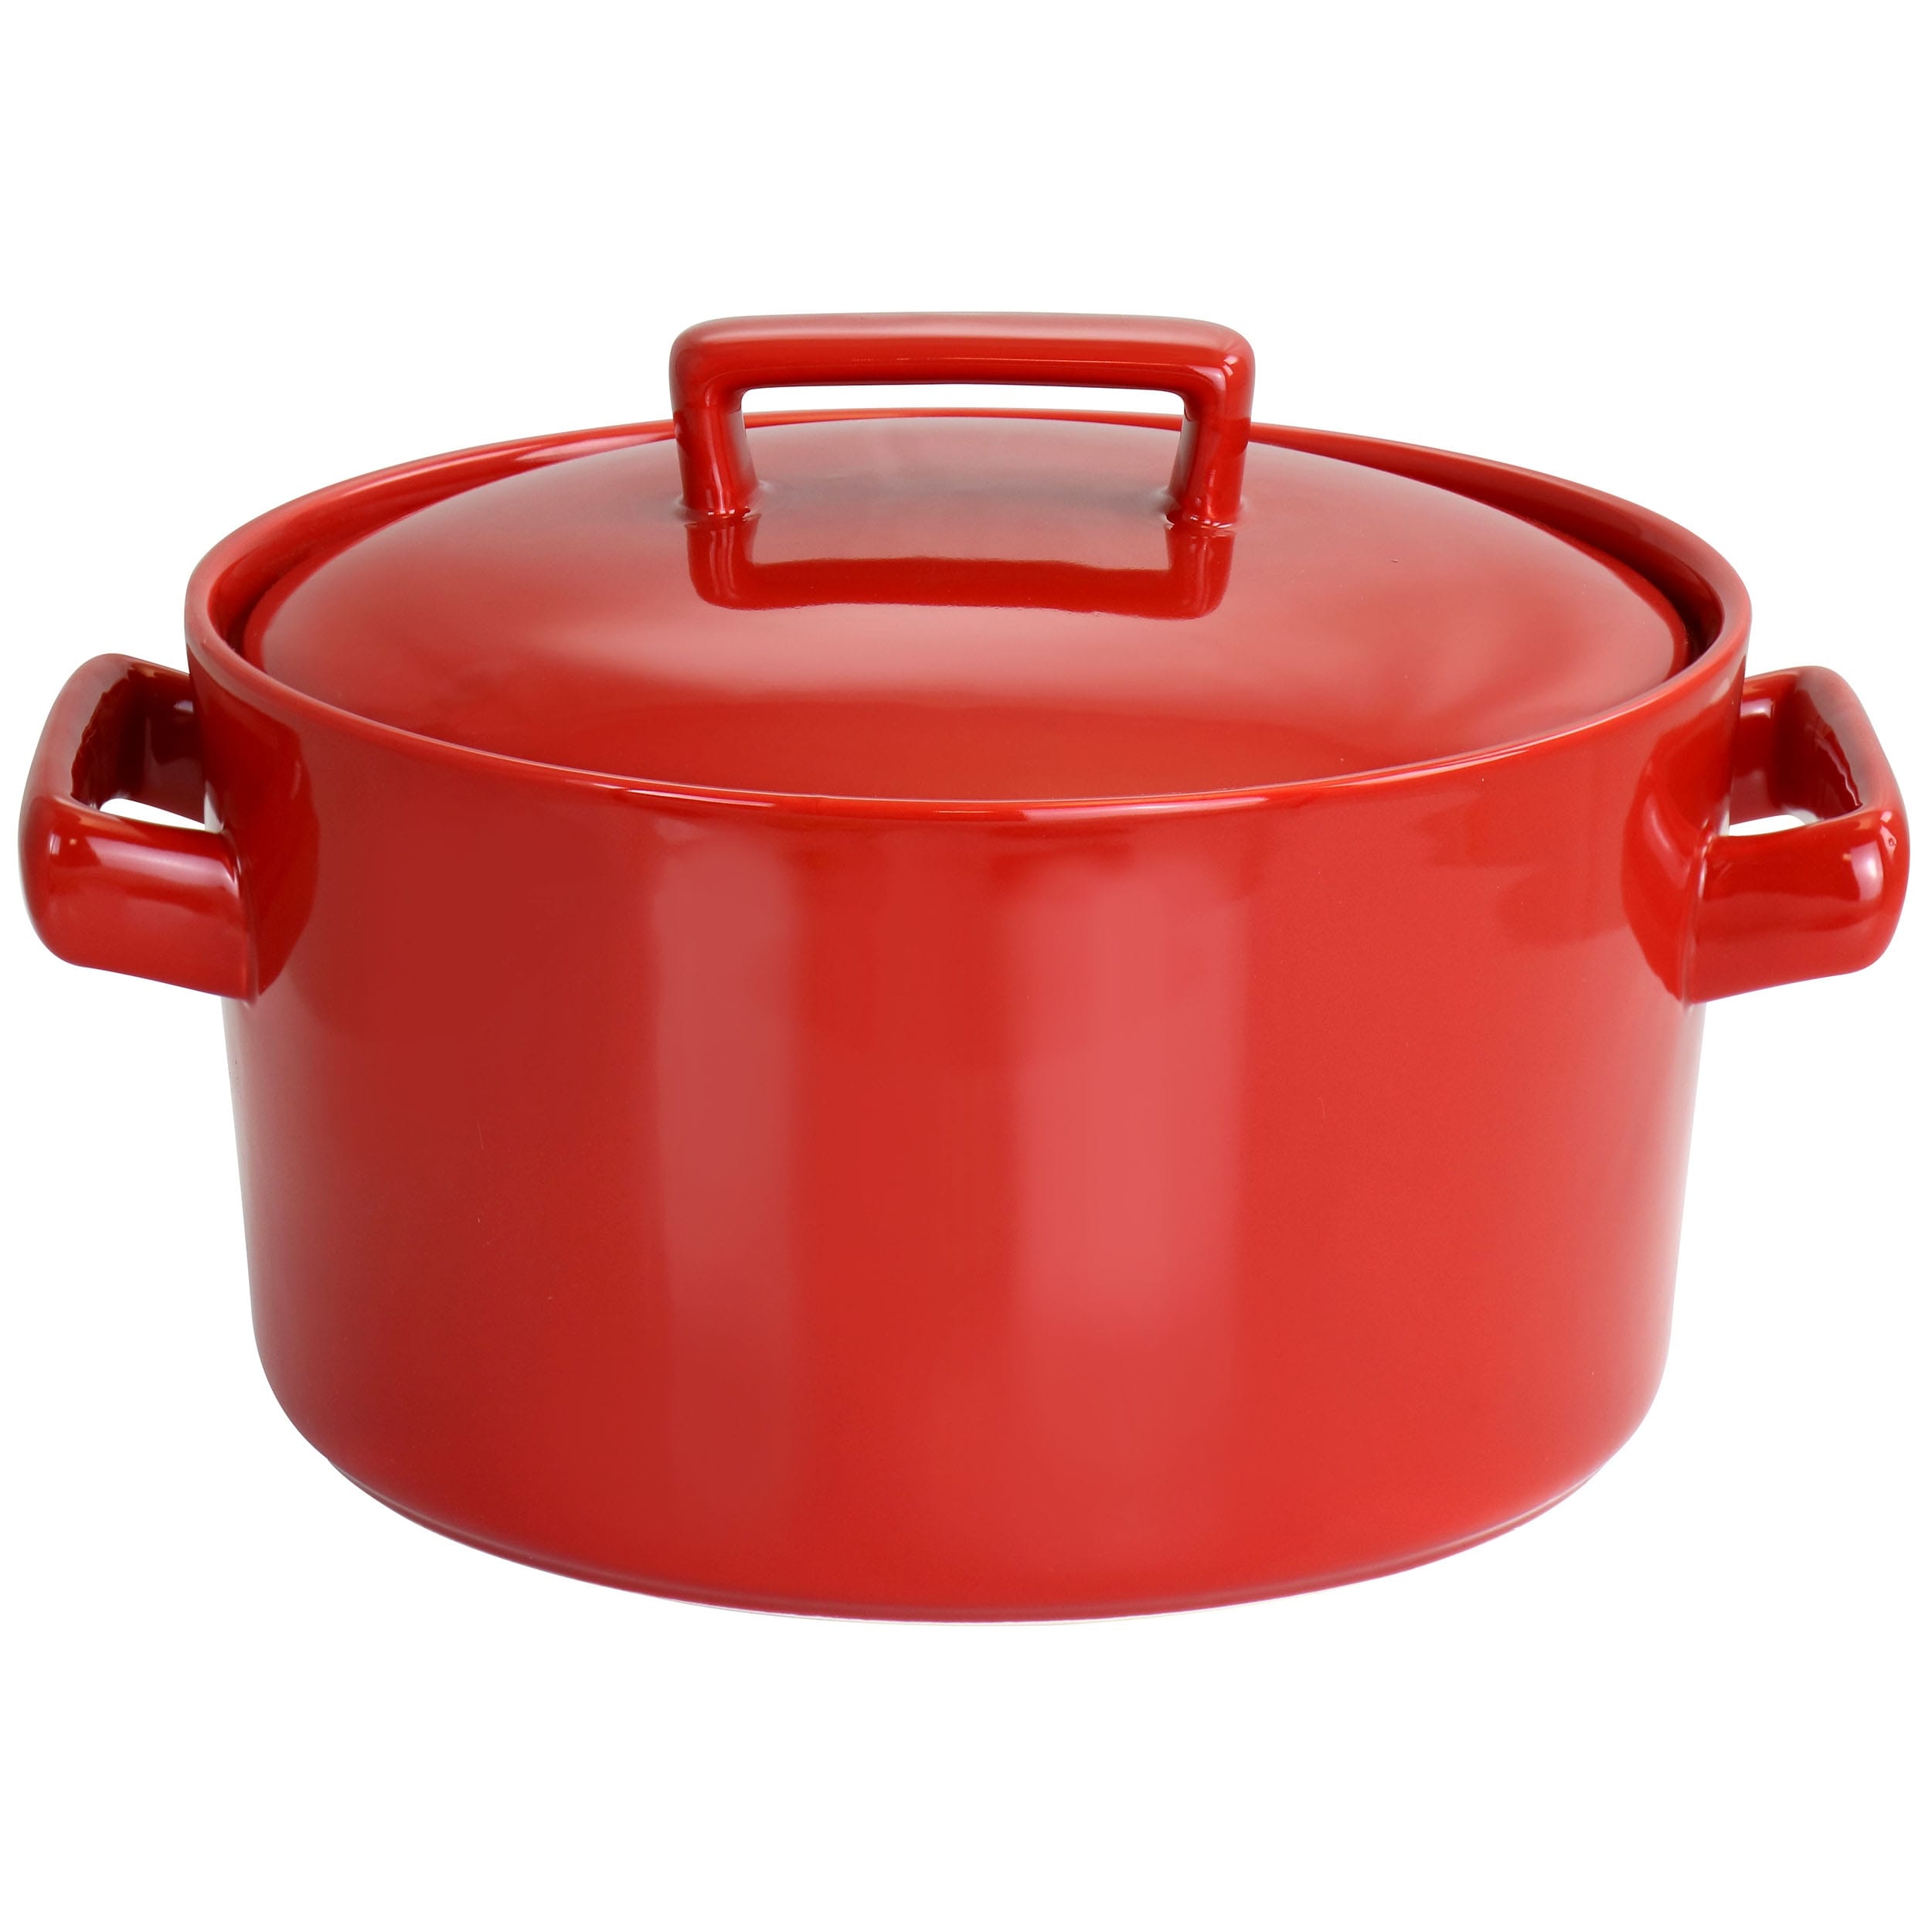 https://ak1.ostkcdn.com/images/products/is/images/direct/7156b73ee032f3e3084268523d105268120dd330/Martha-Stewart-3-Quart-Casserole-with-Lid-in-Red.jpg